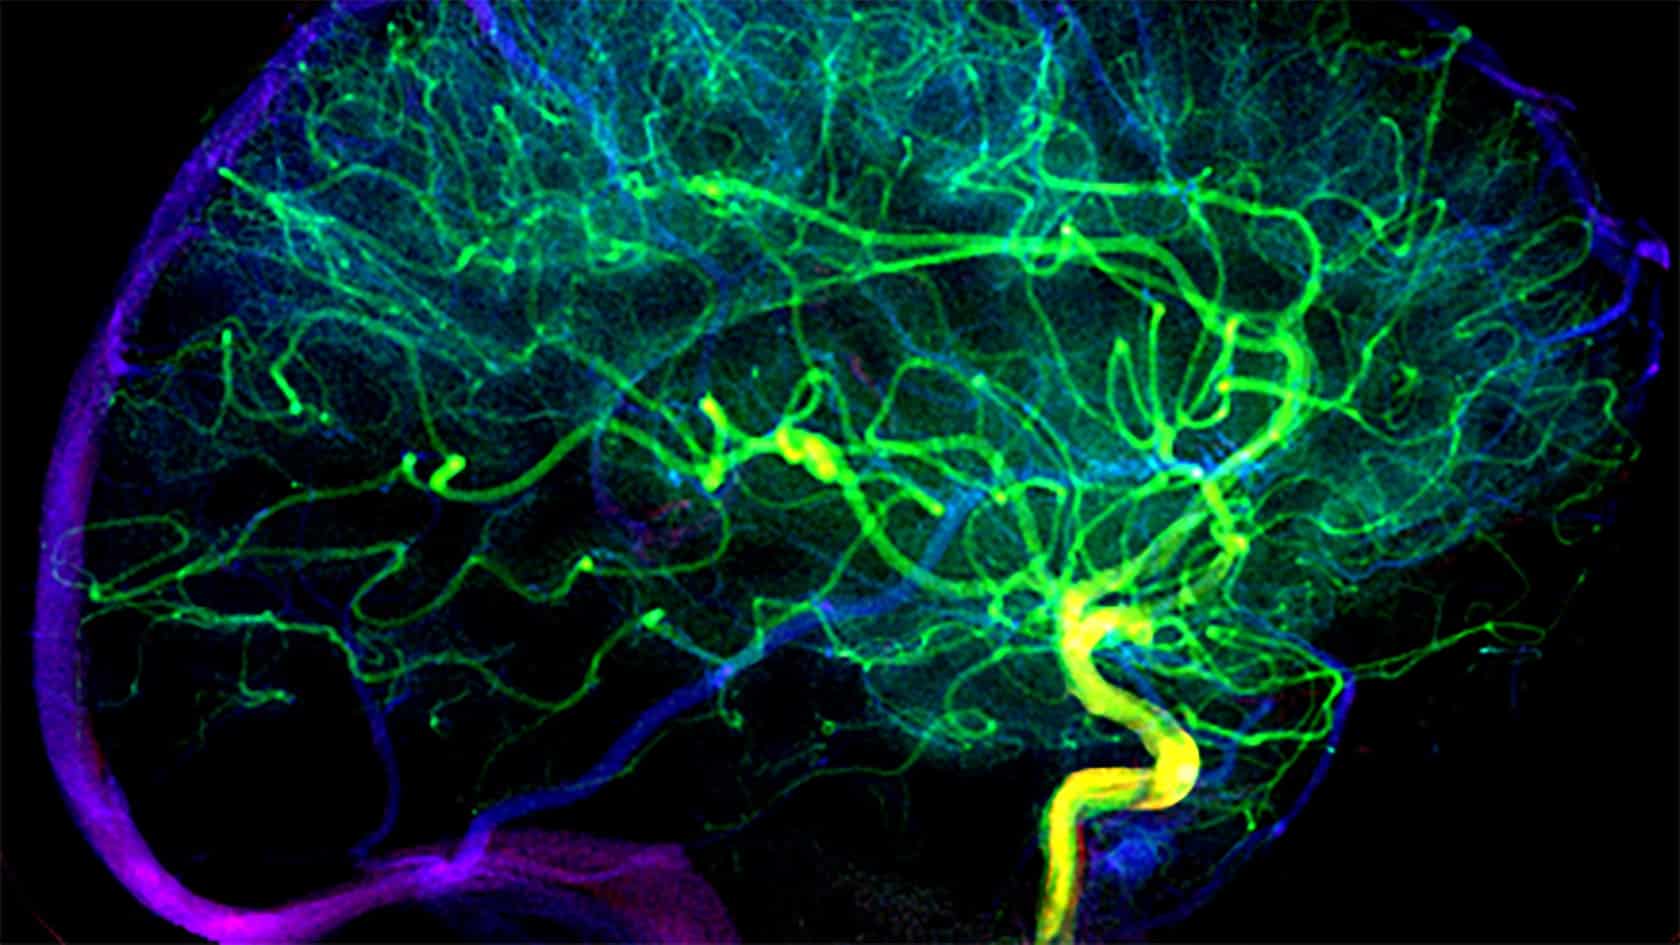 Image showing Visualization of the blood vessels in the brain of a patient without early venous filling, meaning without excessive reperfusion of the brain area after removal of the blood clot in the blocked artery.